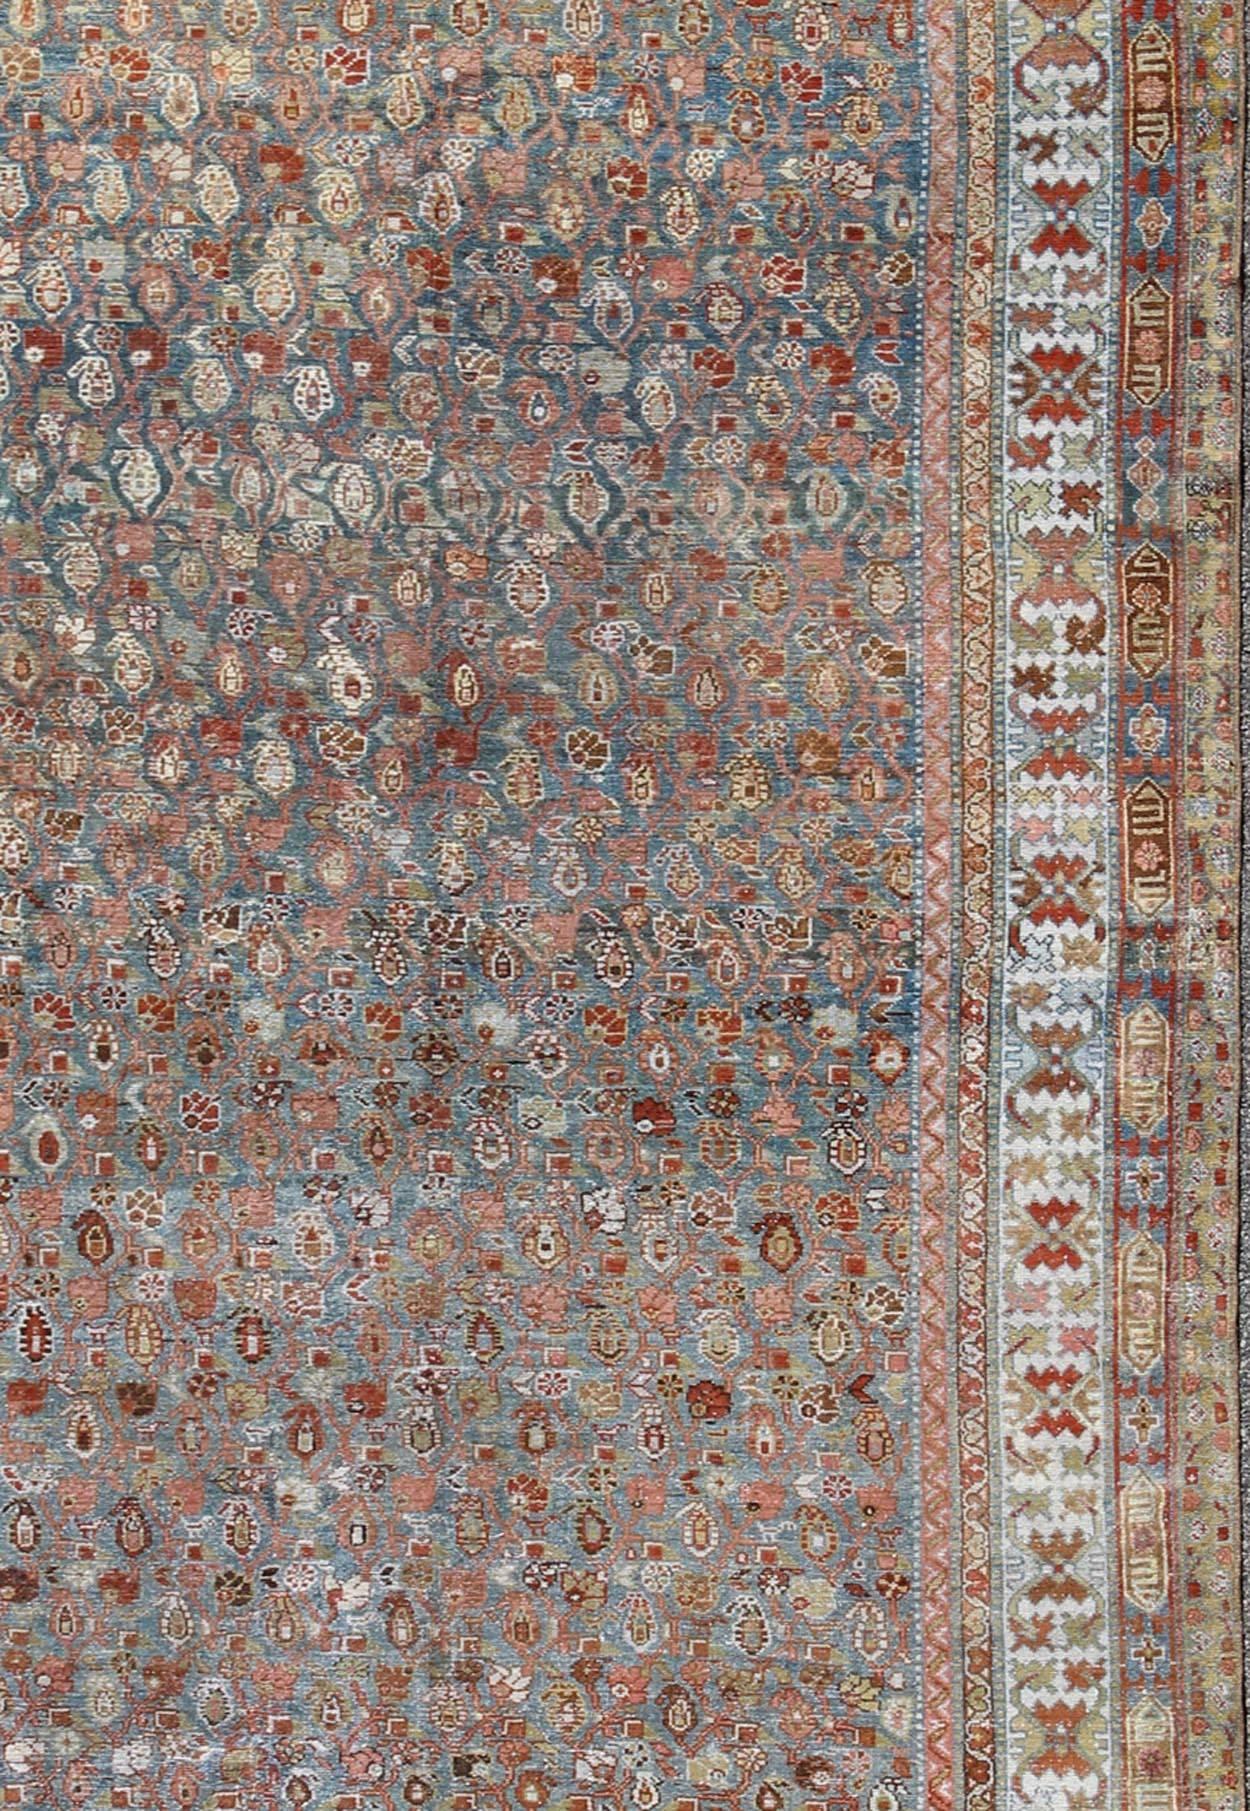 Antique Persian Malayer Rug with All-Over Design in Gray, Blue, Red & Ivory In Good Condition For Sale In Atlanta, GA